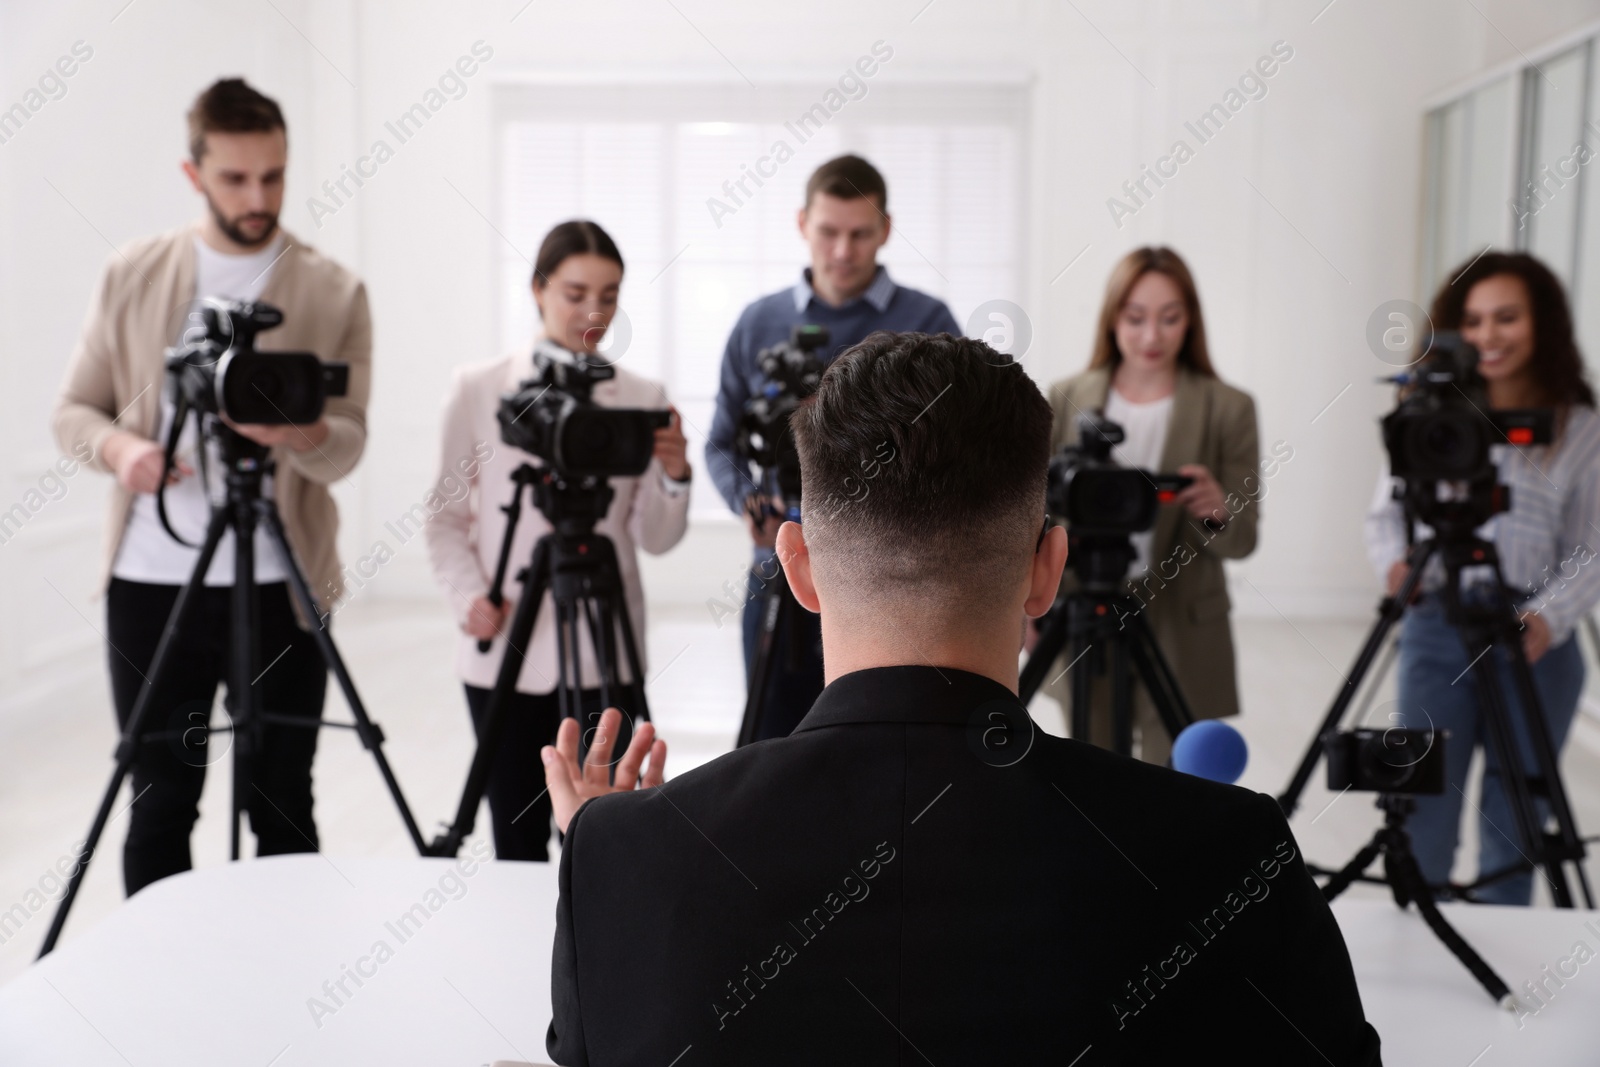 Photo of Businessman giving interview to journalists at official event, back view